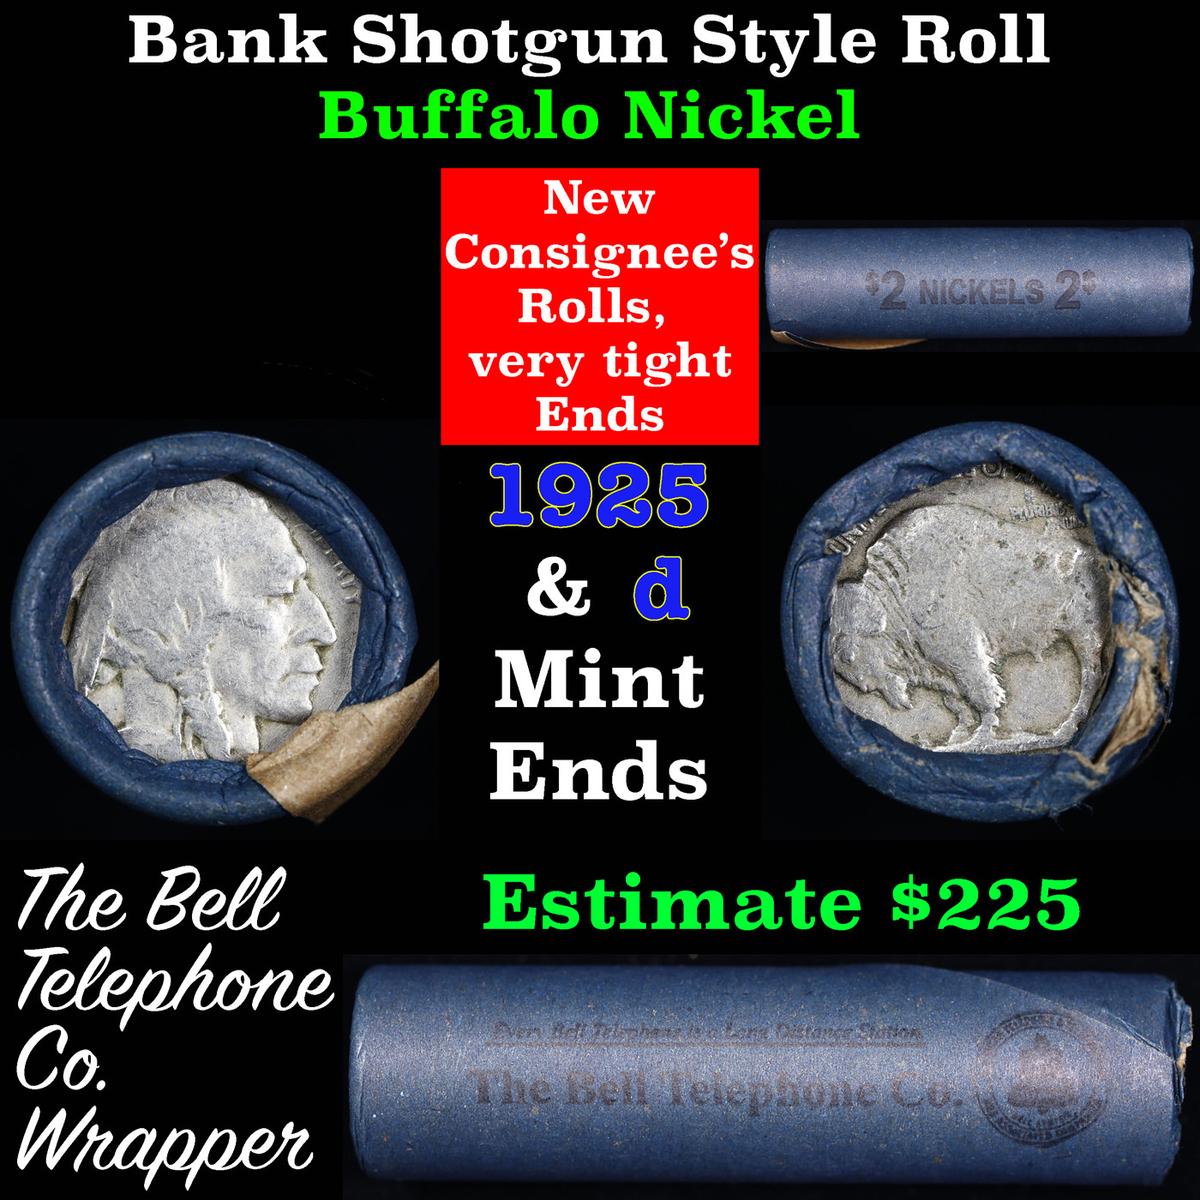 Buffalo Nickel Shotgun Roll in Old Bank Style 'Bell Telephone'  Wrapper 1925 & D Mint Ends